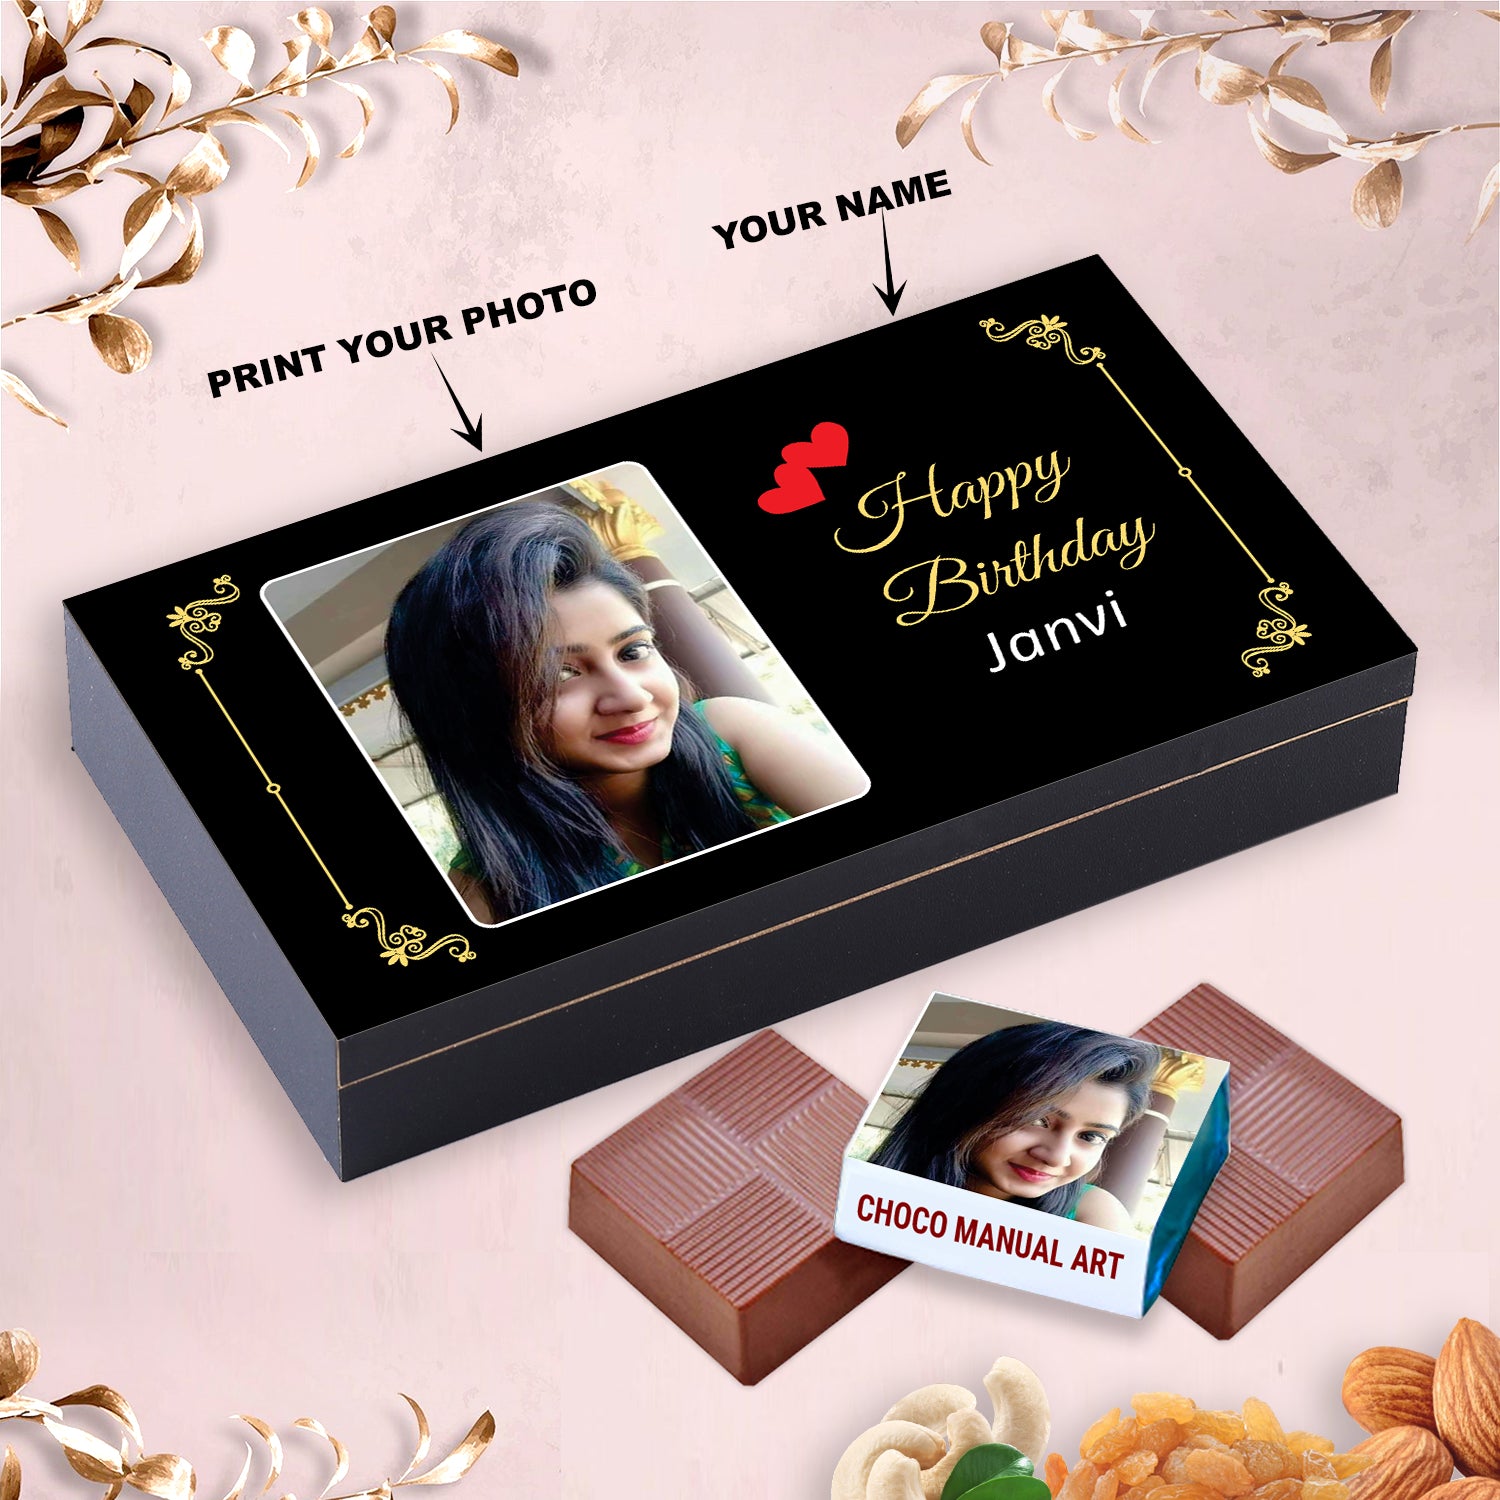 CUSTOMIZED GIFTS WITH NAME PRINTED ON WRAPPER AND PERSONAL MESSAGE INSIDE THE BOX FULL OF CHOCOLATES